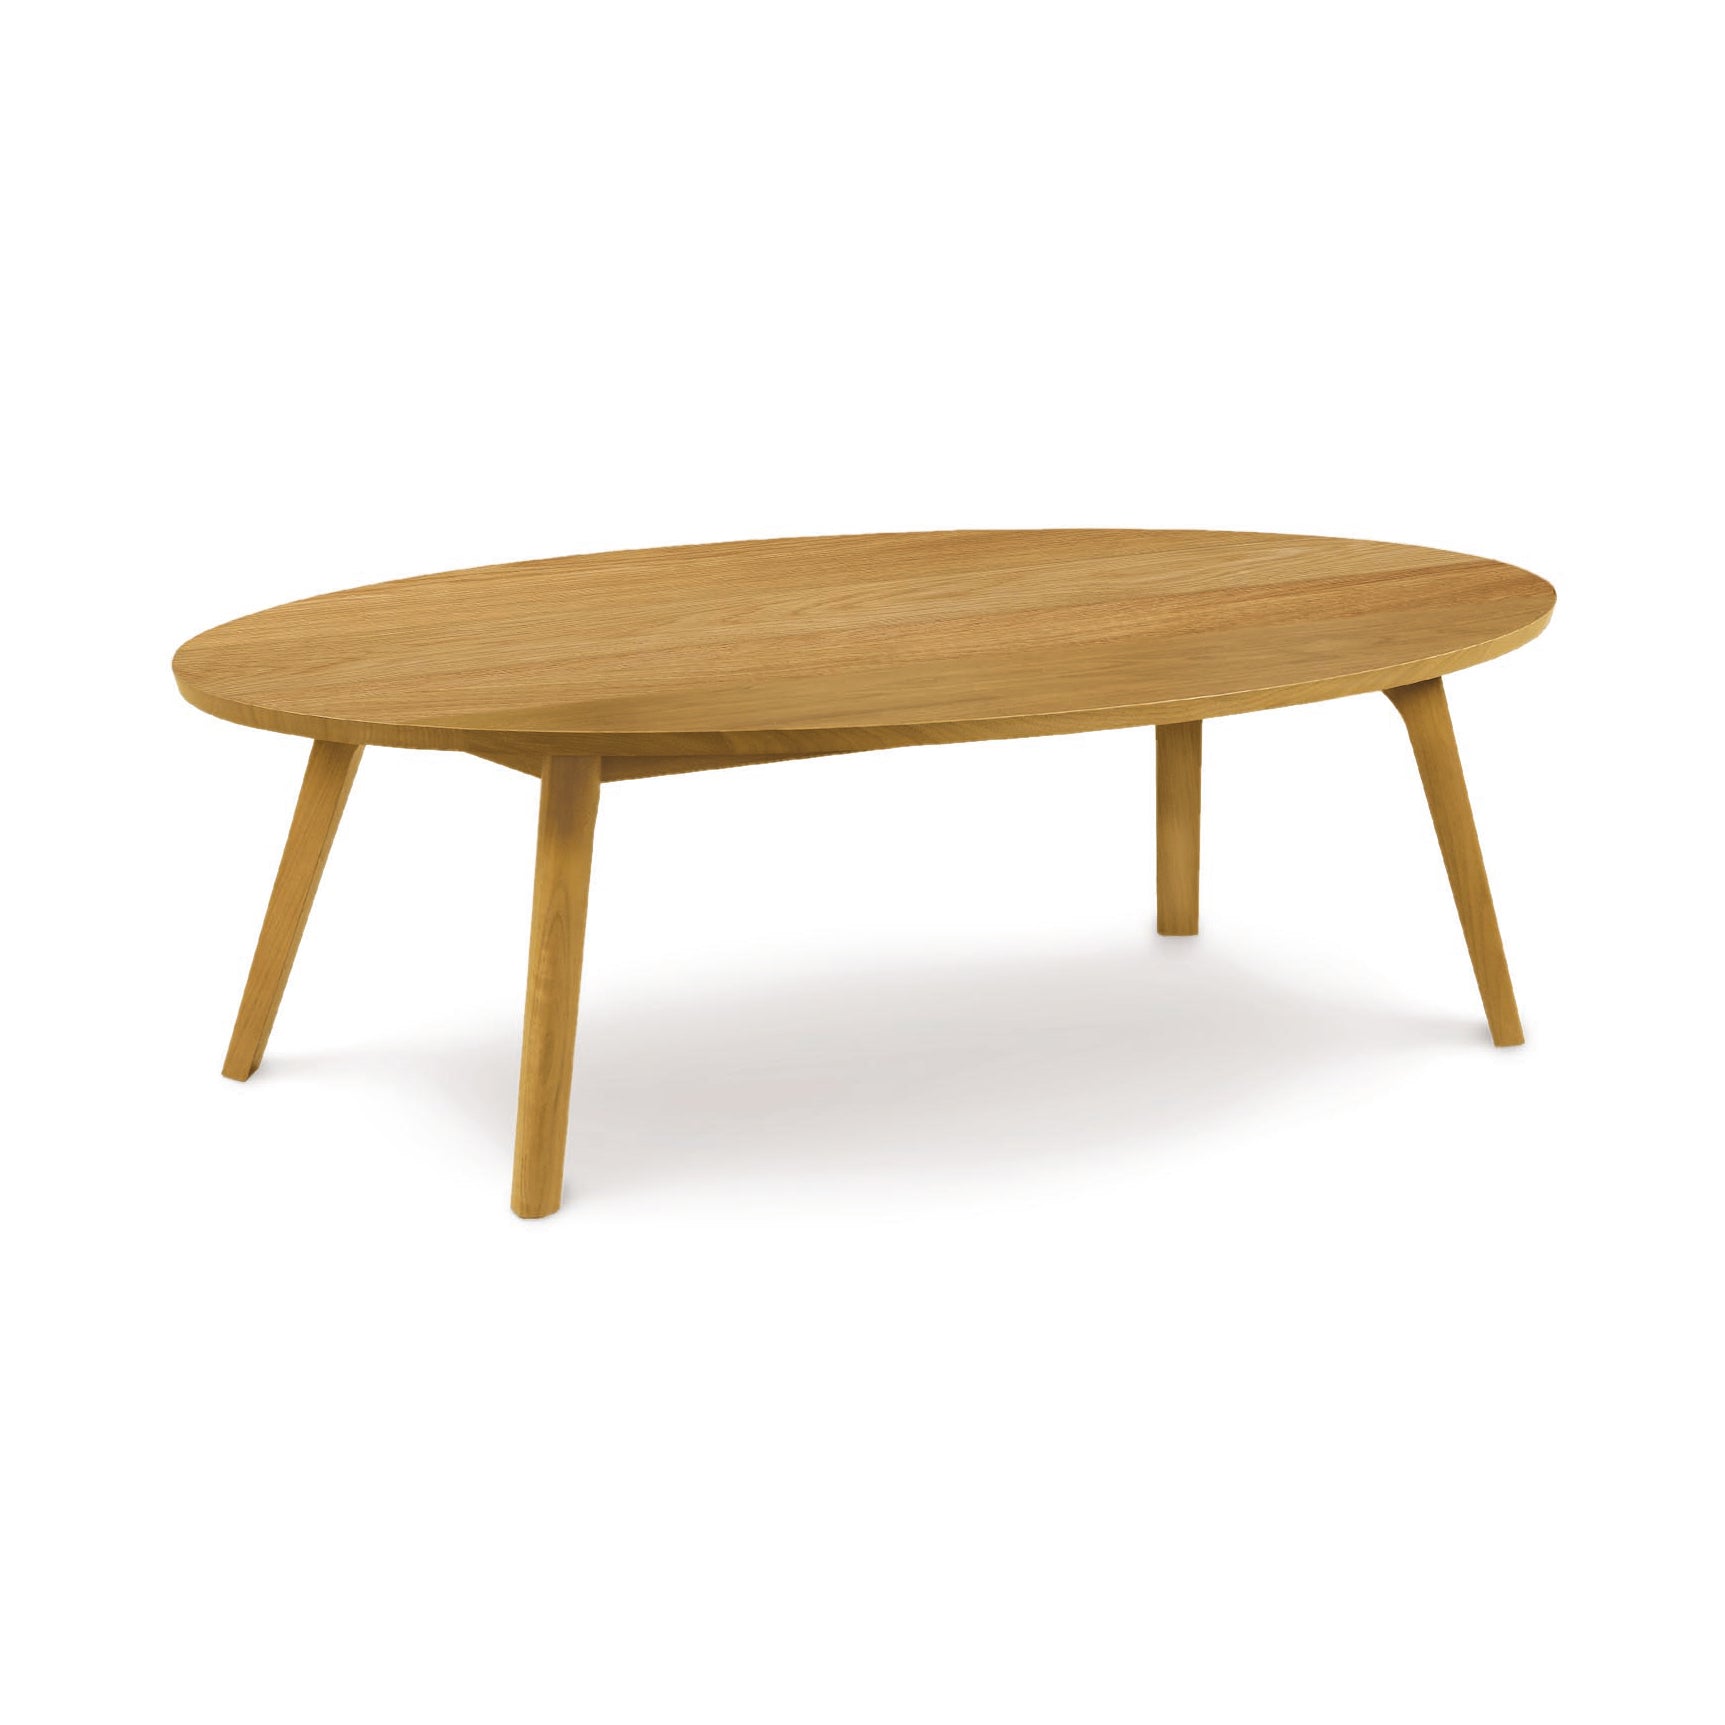 A Copeland Furniture Catalina Oval Coffee Table - Priority Ship with legs, crafted from sustainable harvested hardwoods.